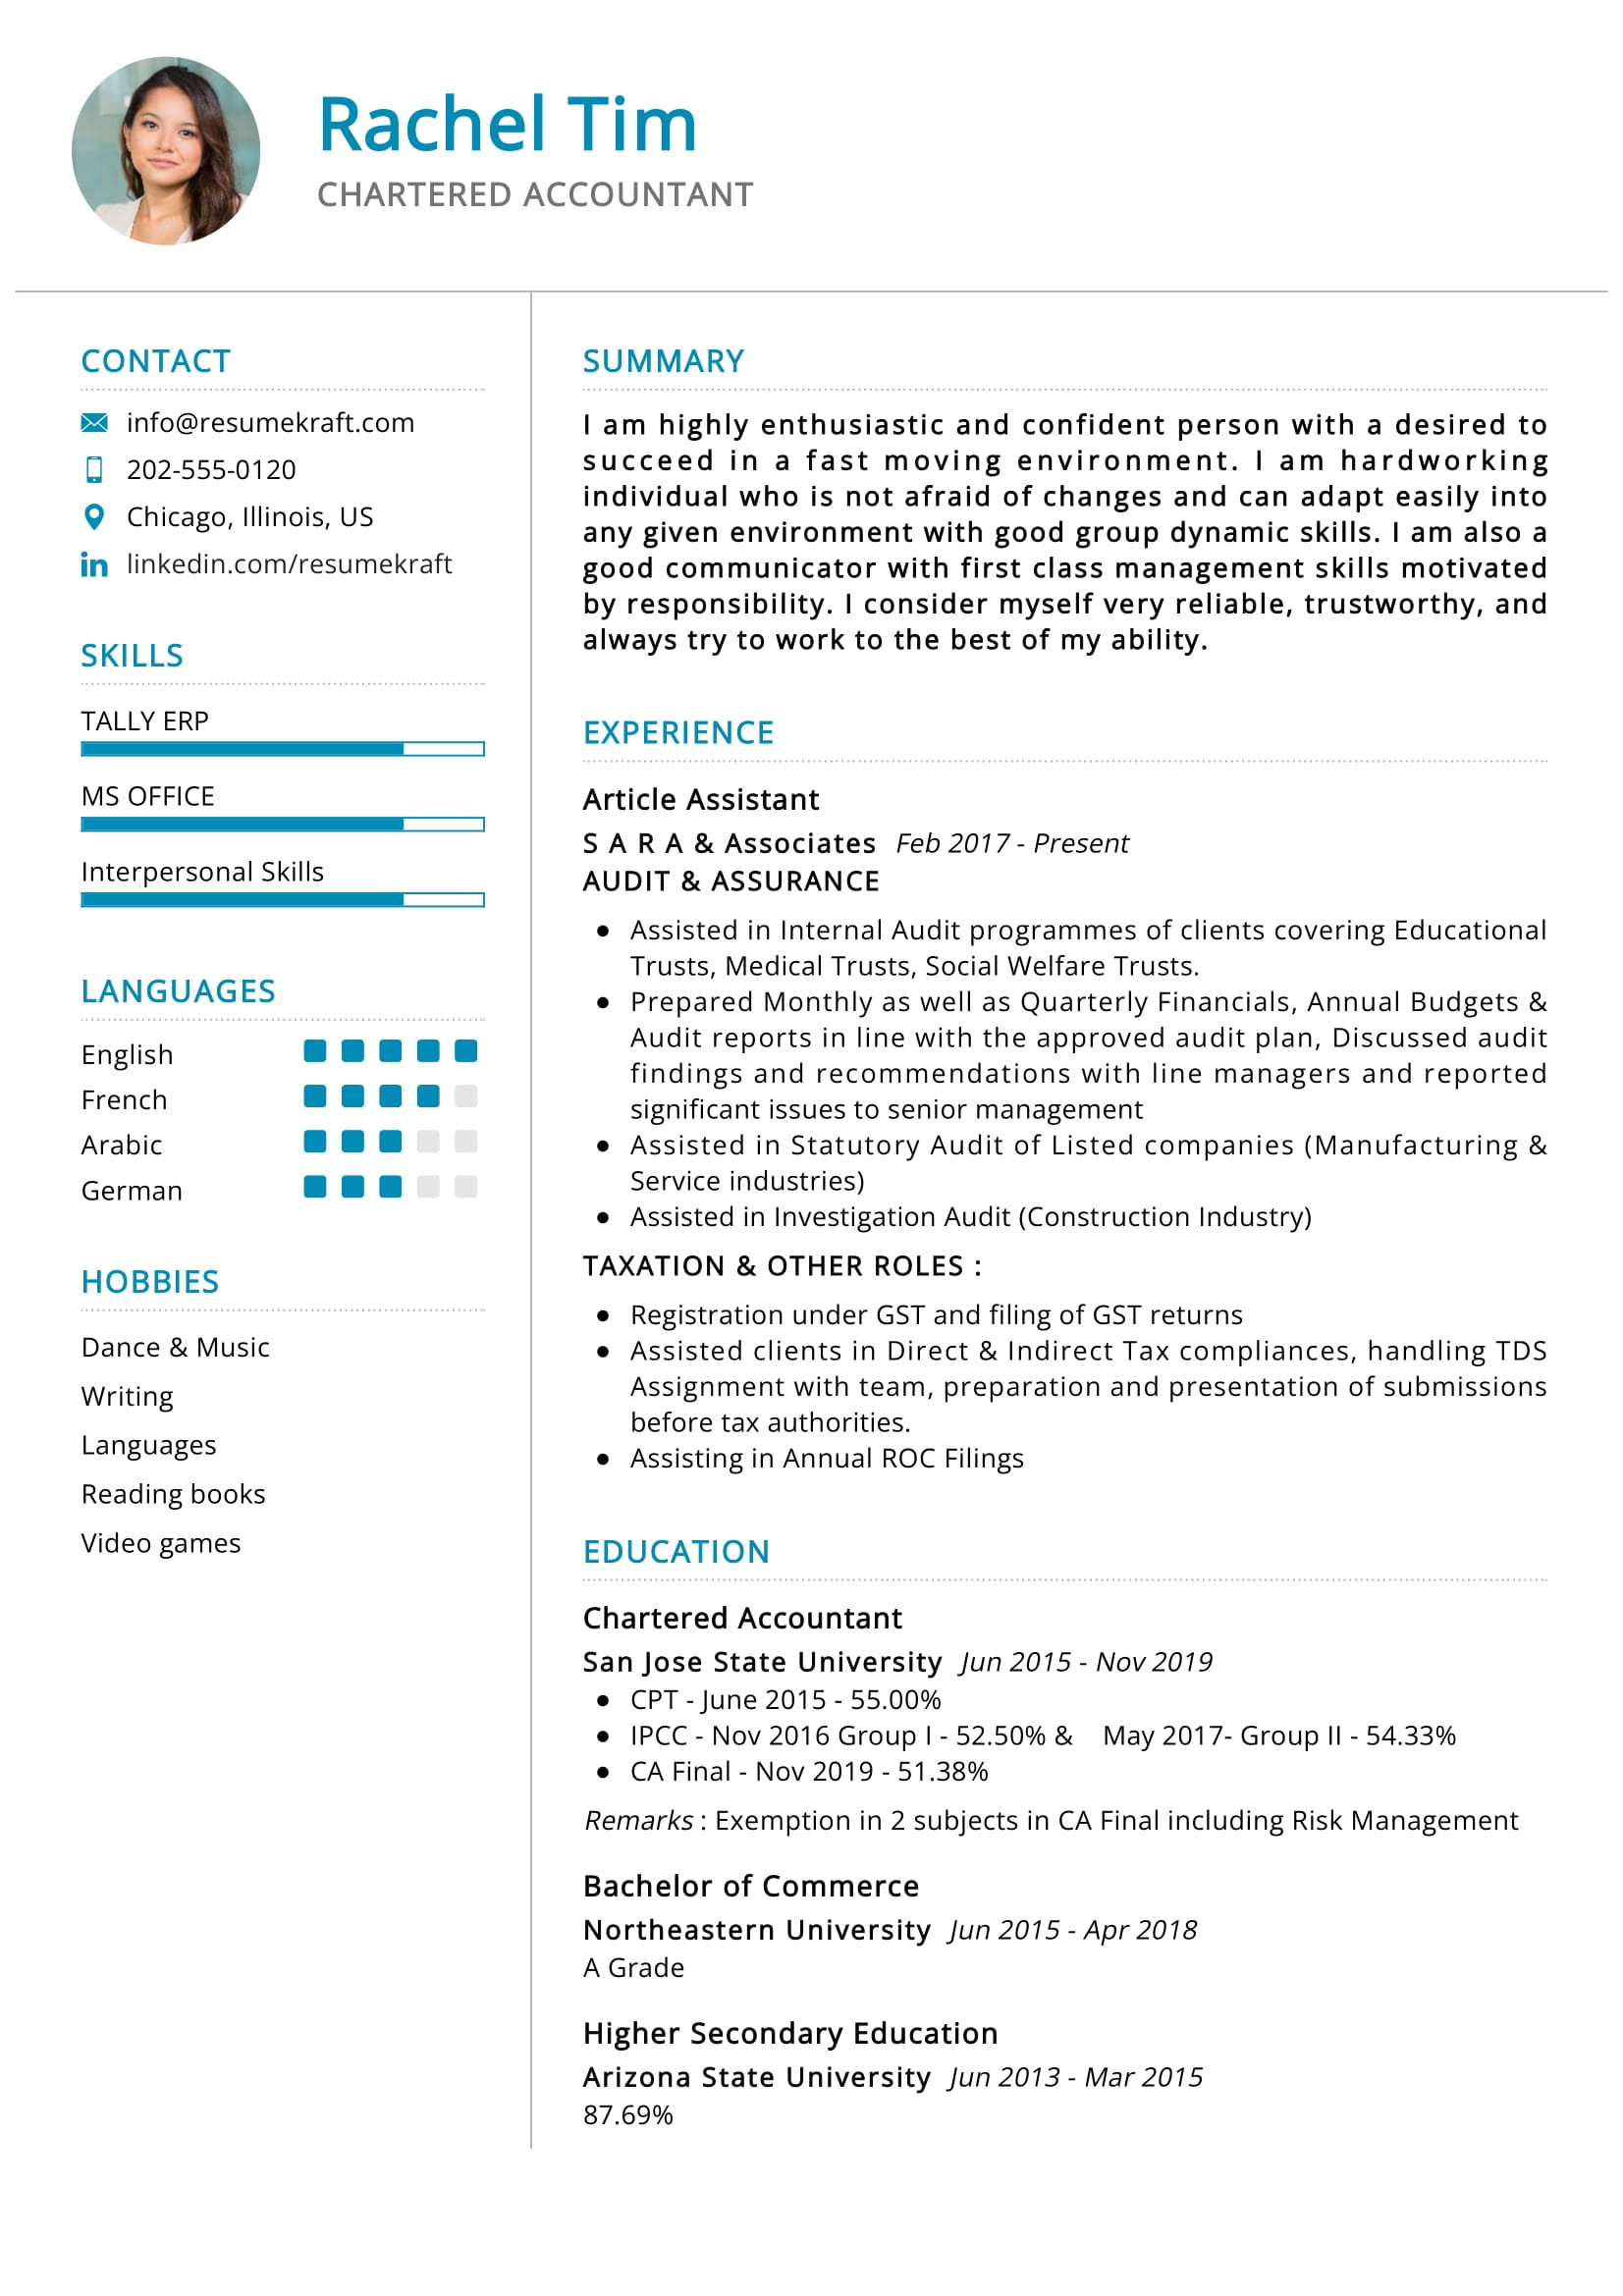 Sample Of A Professional Accountant Resume Chartered Accountant Resume Example 2022 Writing Tips – Resumekraft